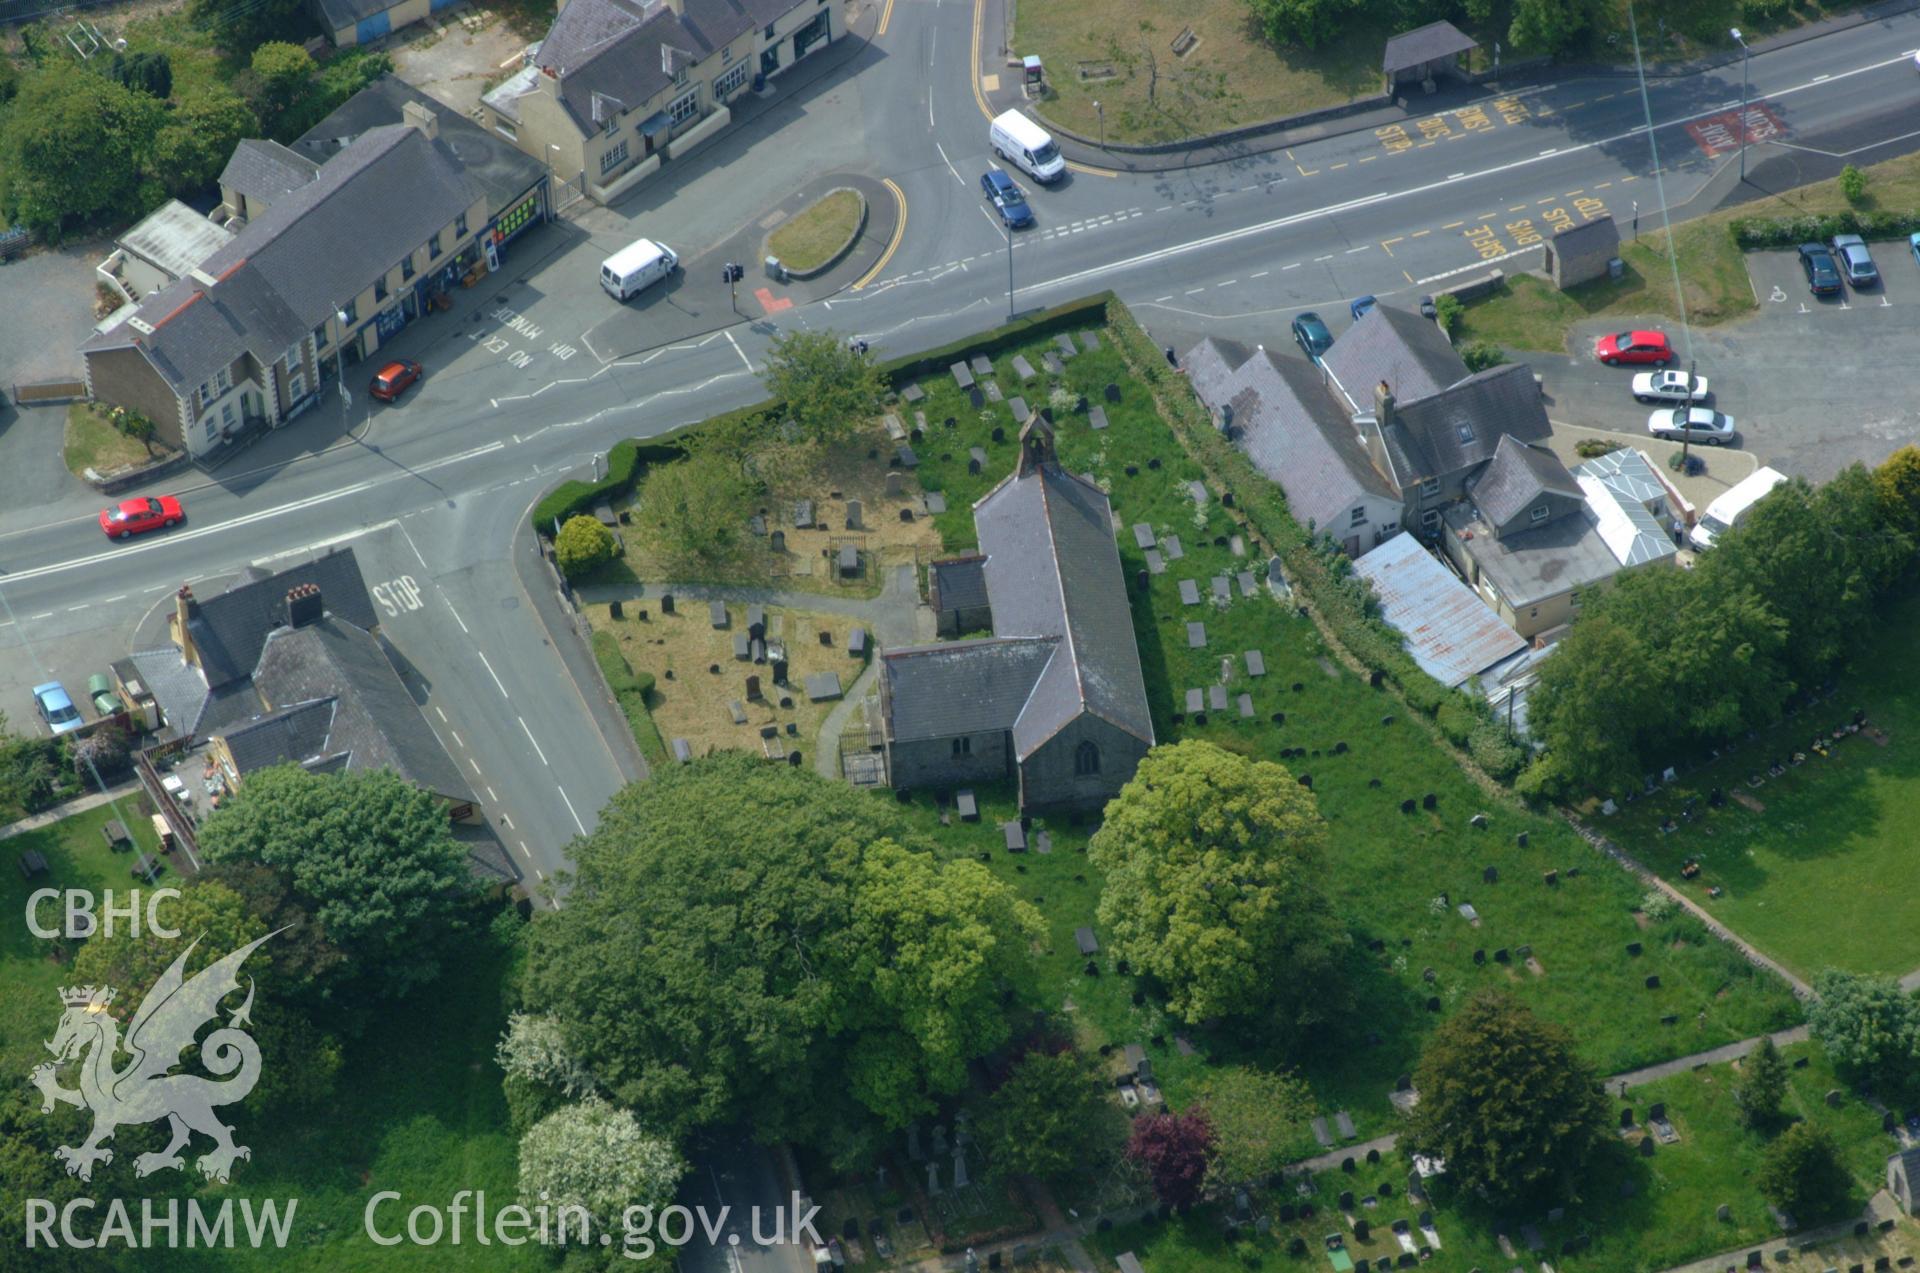 RCAHMW colour oblique aerial photograph of St Mary's Church, Pentraeth taken on 26/05/2004 by Toby Driver